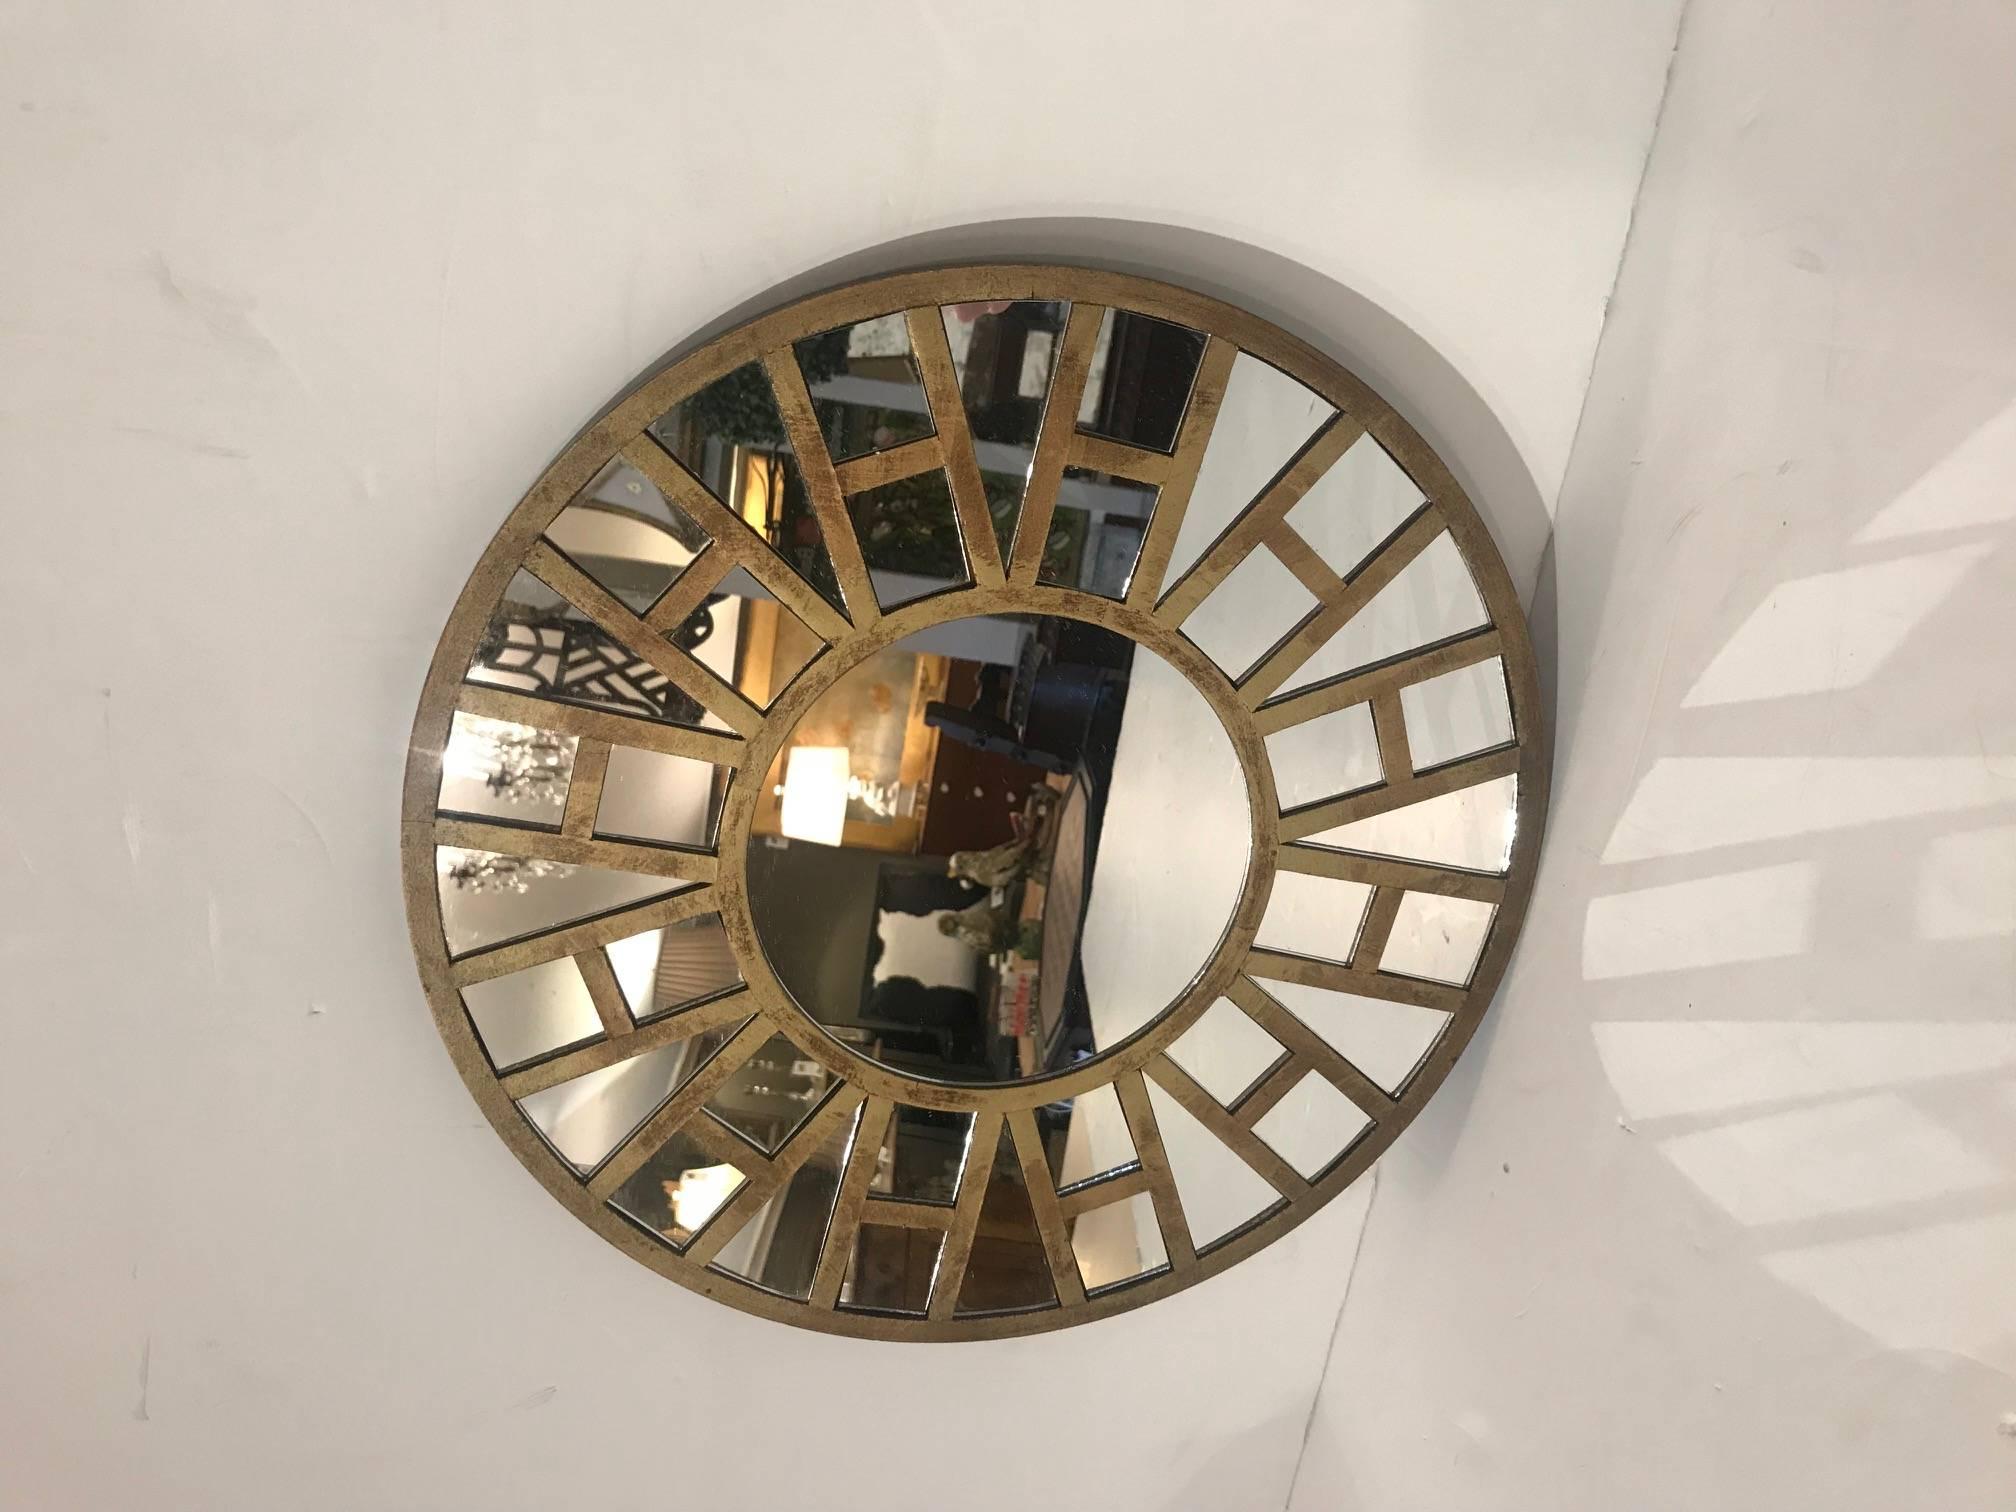 Mid-Century Modern small round mirror with large burst of style, having a wood composition gilded overlay that looks like the letter H strung together.
Centre mirror 6.5 inches diameter.